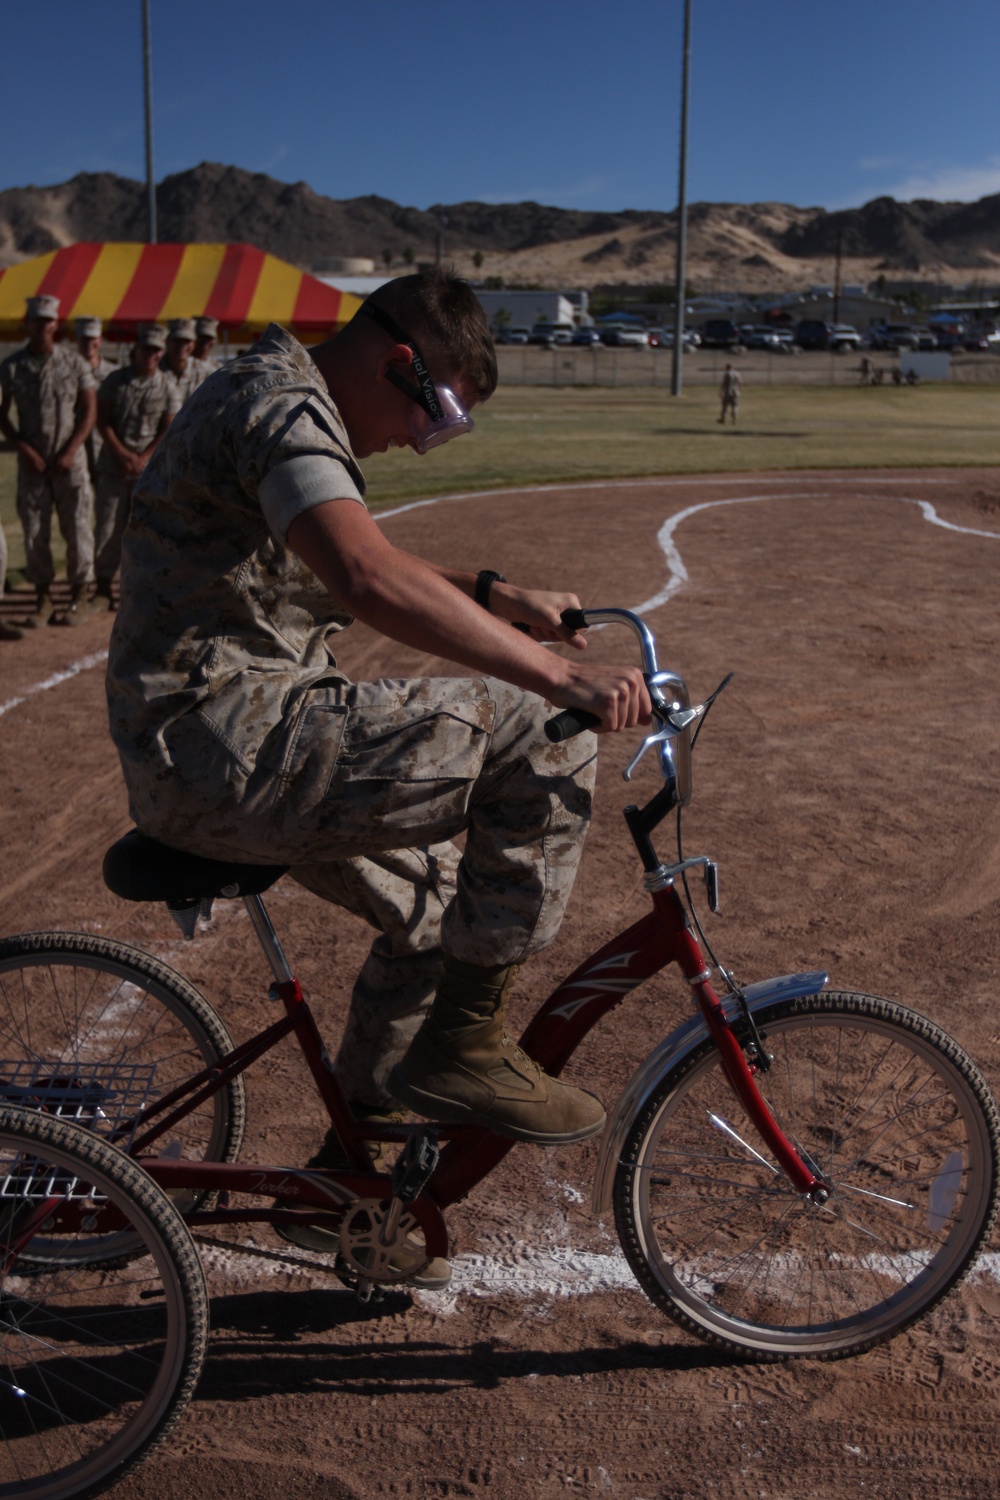 Marine Corps Communications-Electronics School students participate in third annual Safety Fair